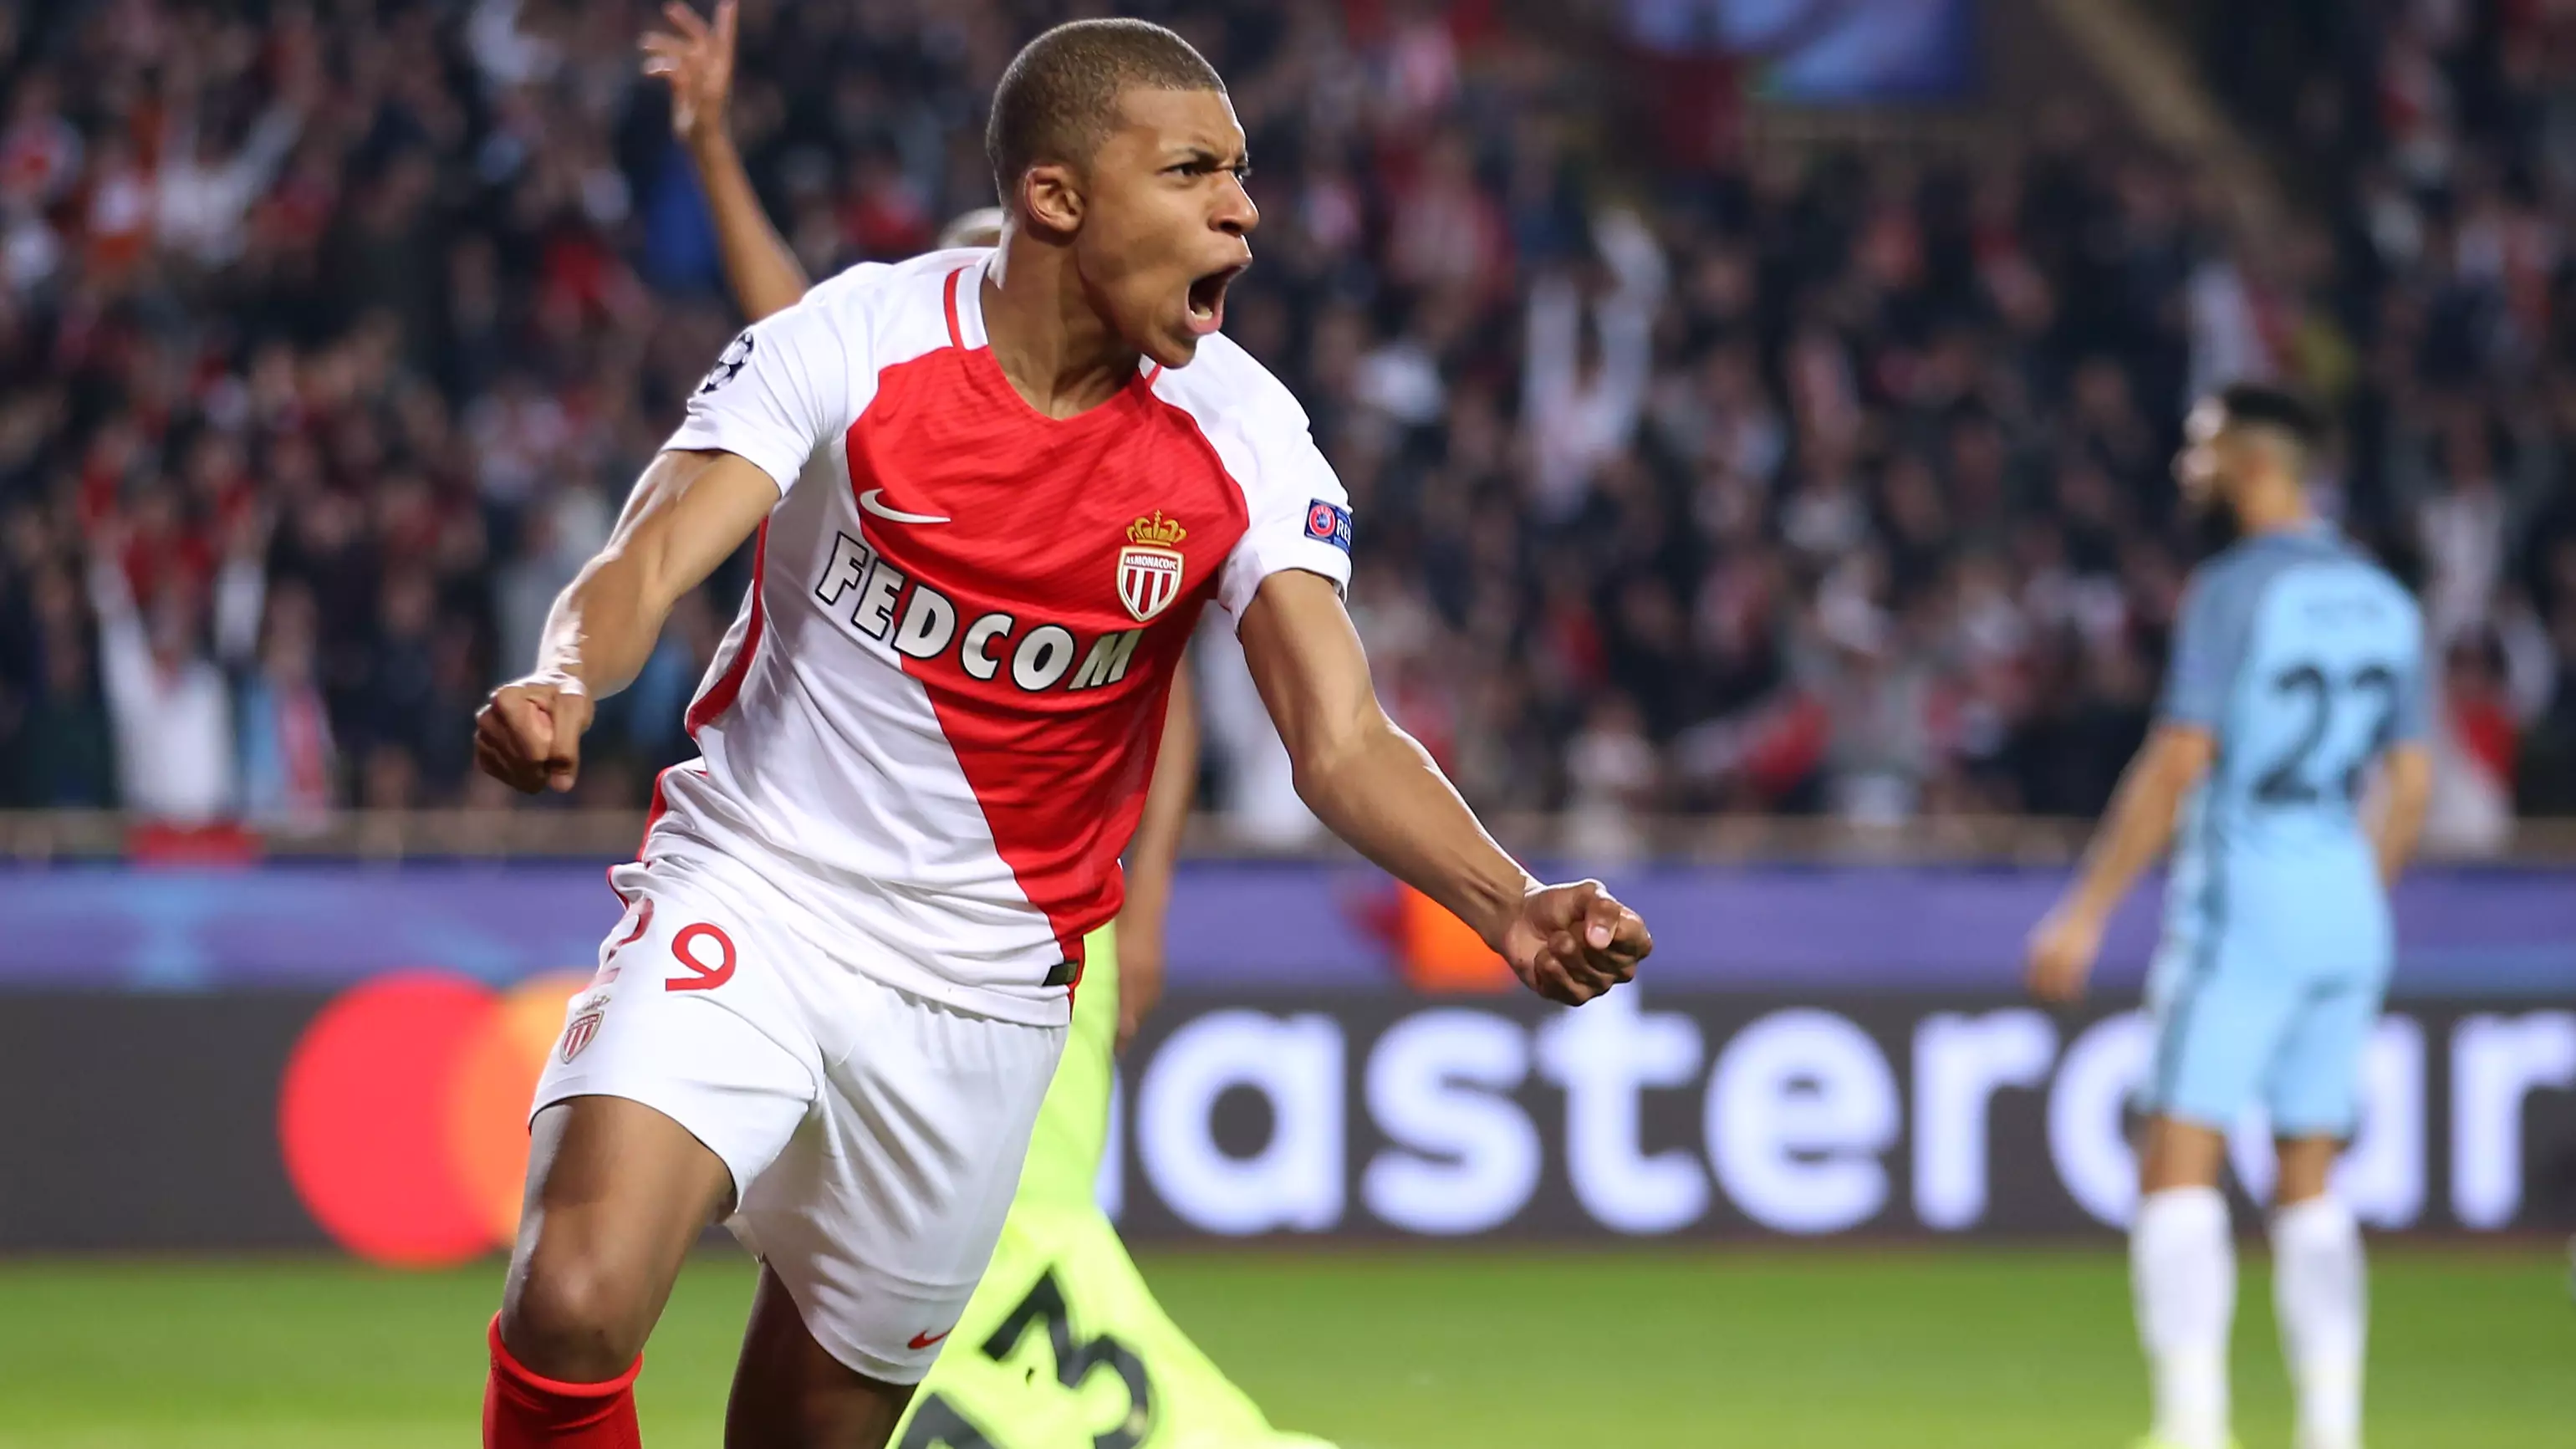 Zinedine Zidane And Real Madrid Are Desperate To Land Kylian Mbappe